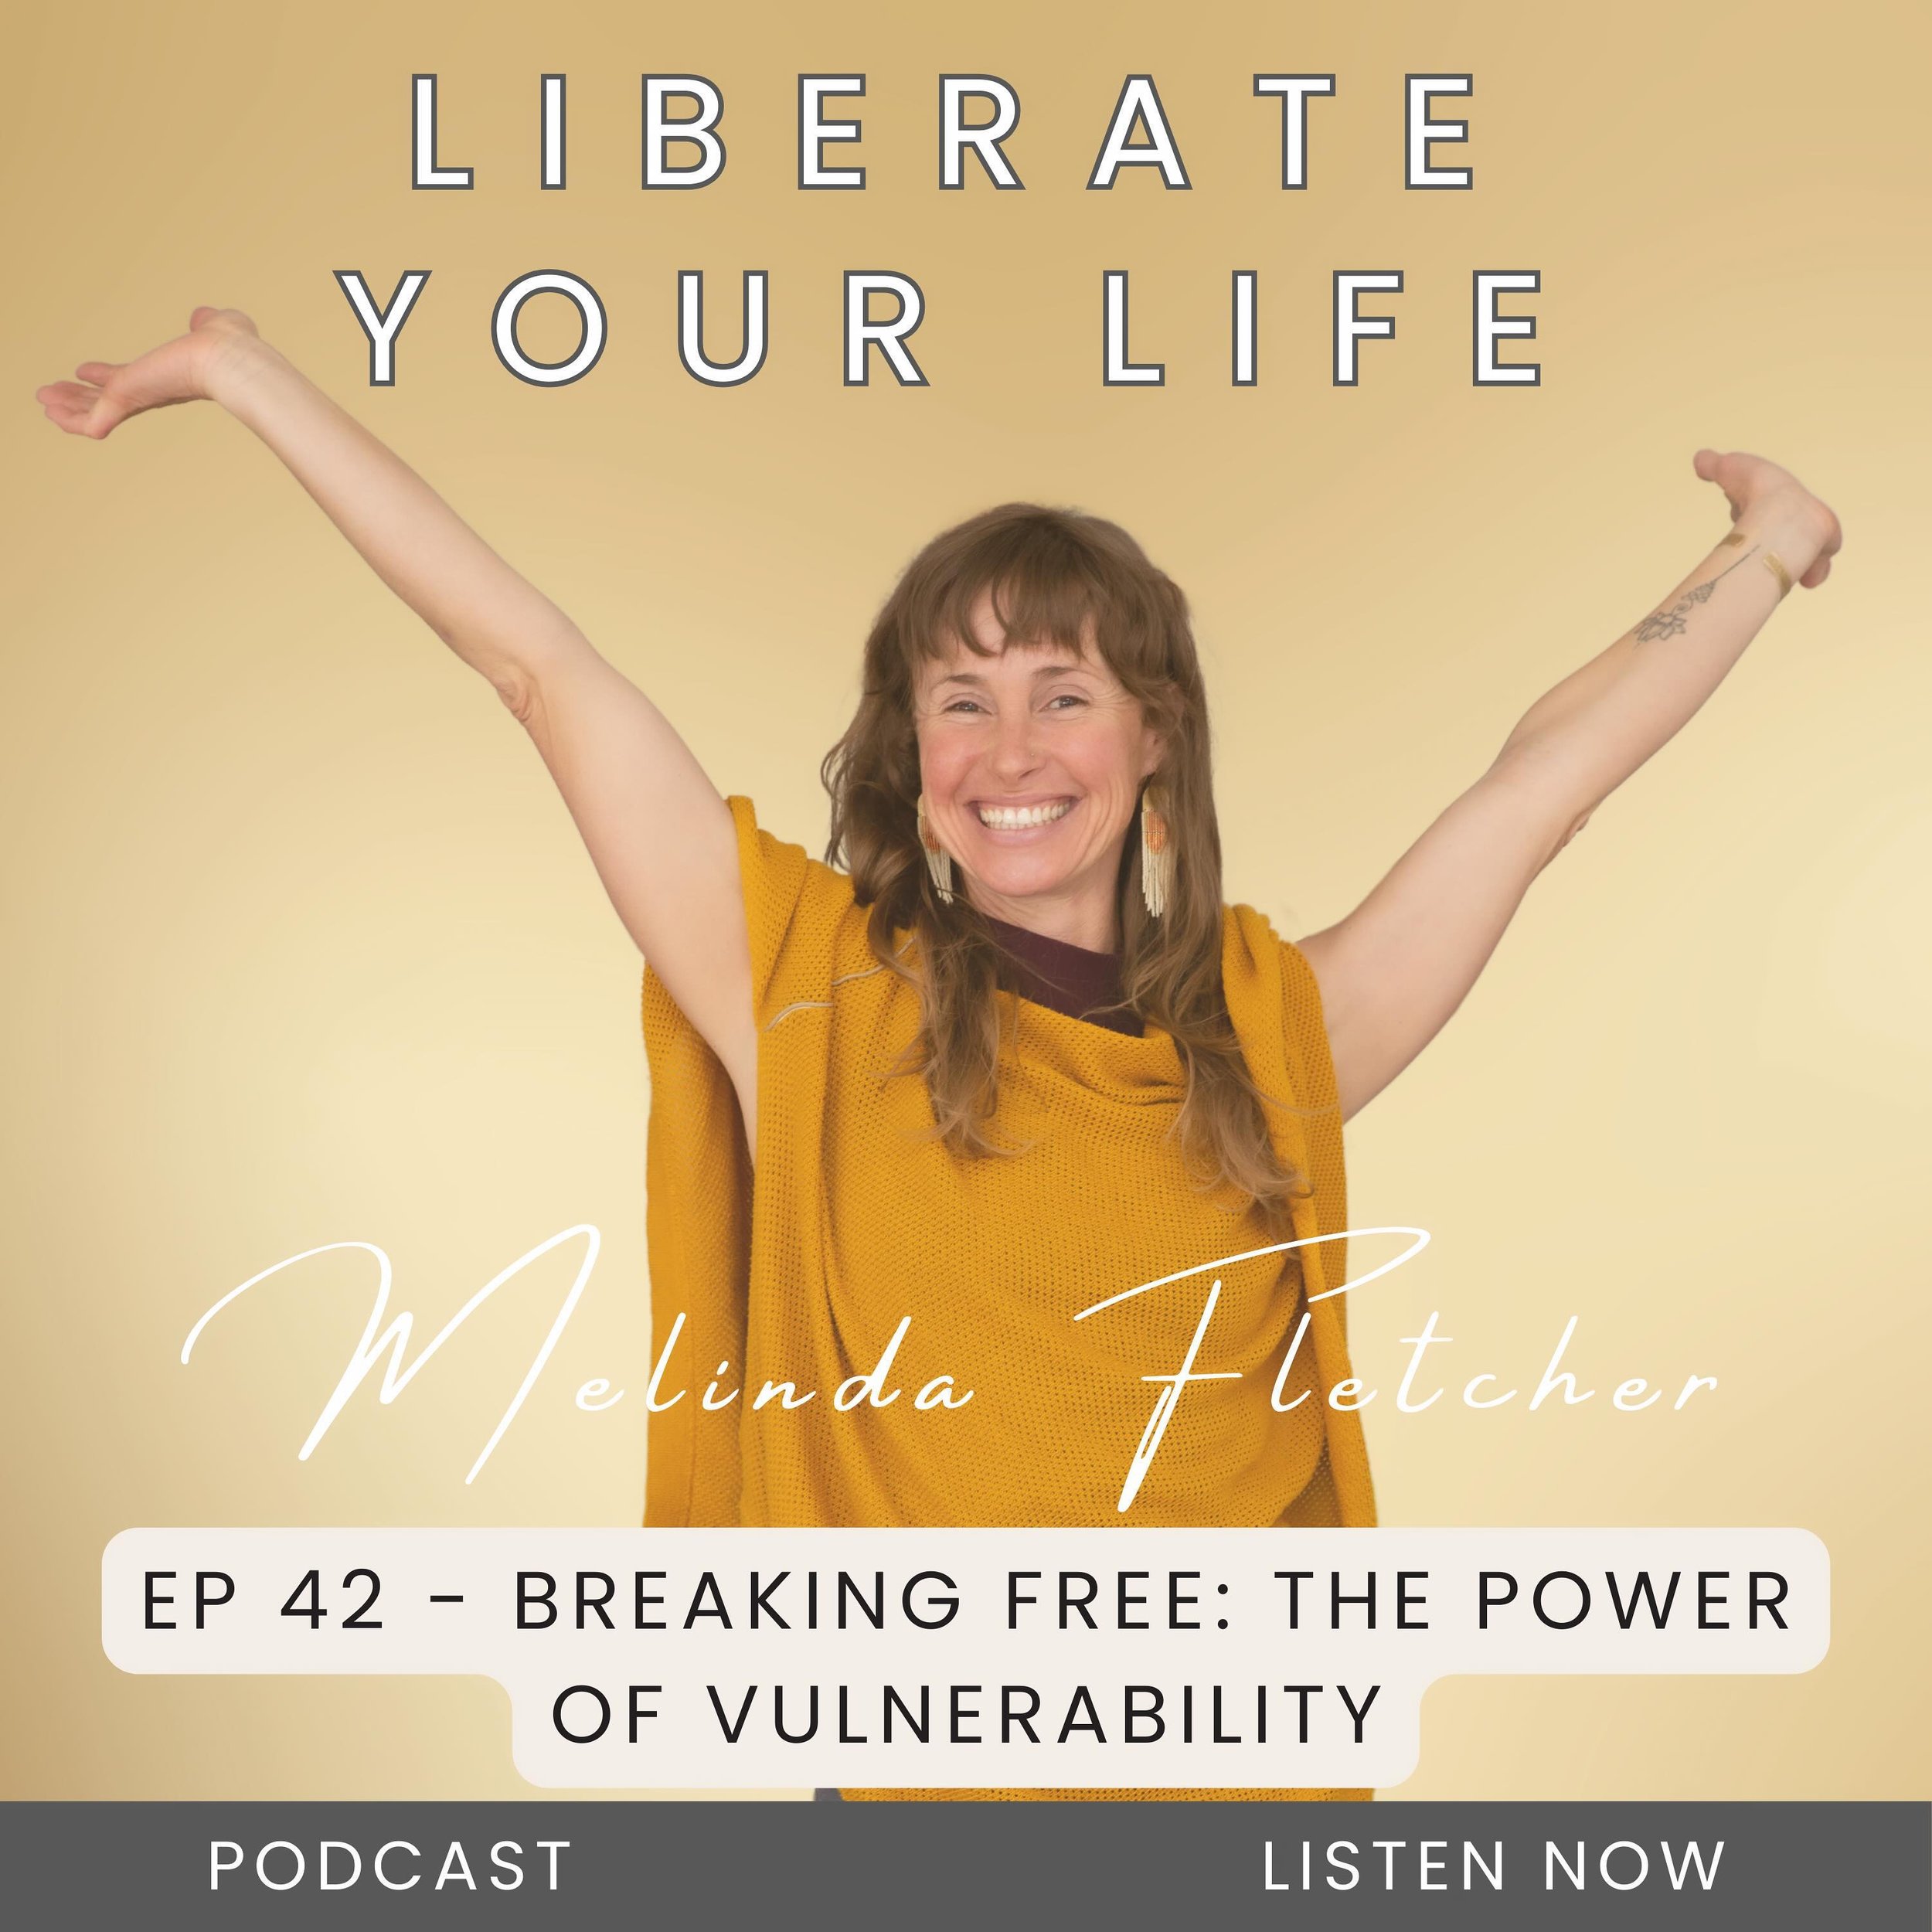 🌟 New Episode 🌟 &ldquo;Breaking Free: The Power of Vulnerability&rdquo; is now live on the &ldquo;Liberate Your Life&rdquo; podcast! 🎧

In this transformative episode, we dive deep into how embracing vulnerability isn&rsquo;t just about opening up